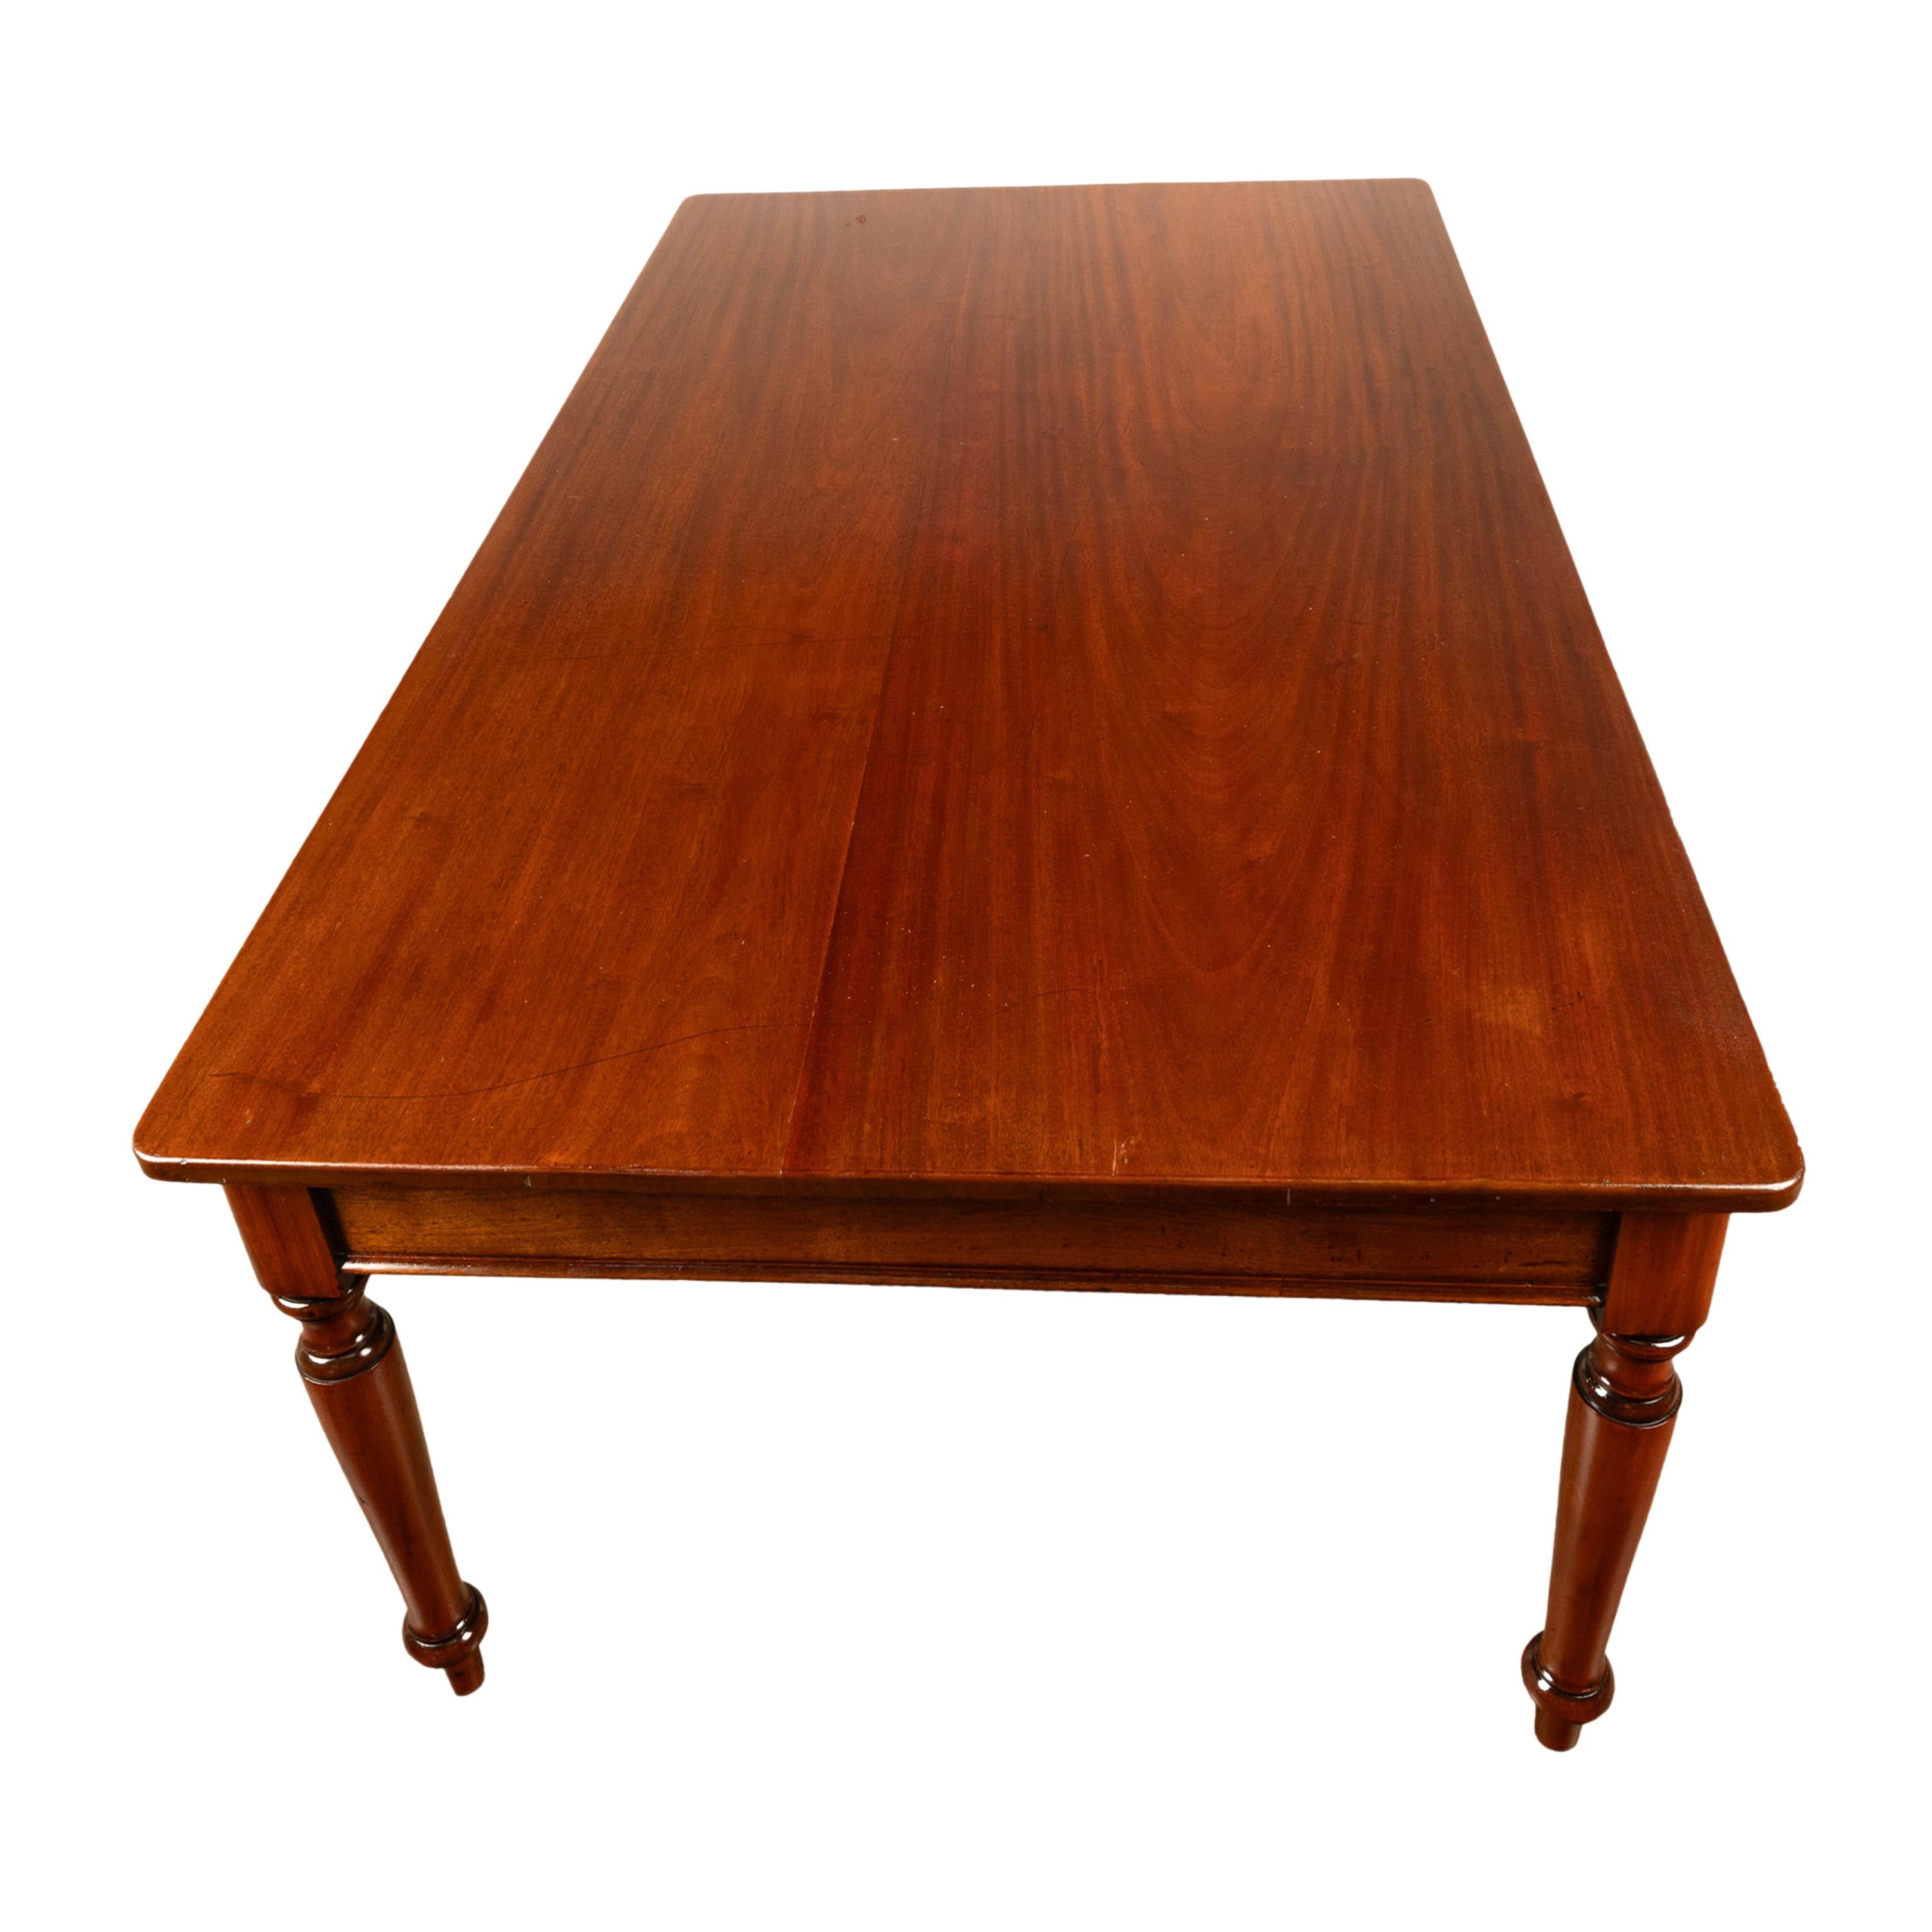 Antique Monumental 19th Century Mahogany Library Conference Dining Table 1860 For Sale 11